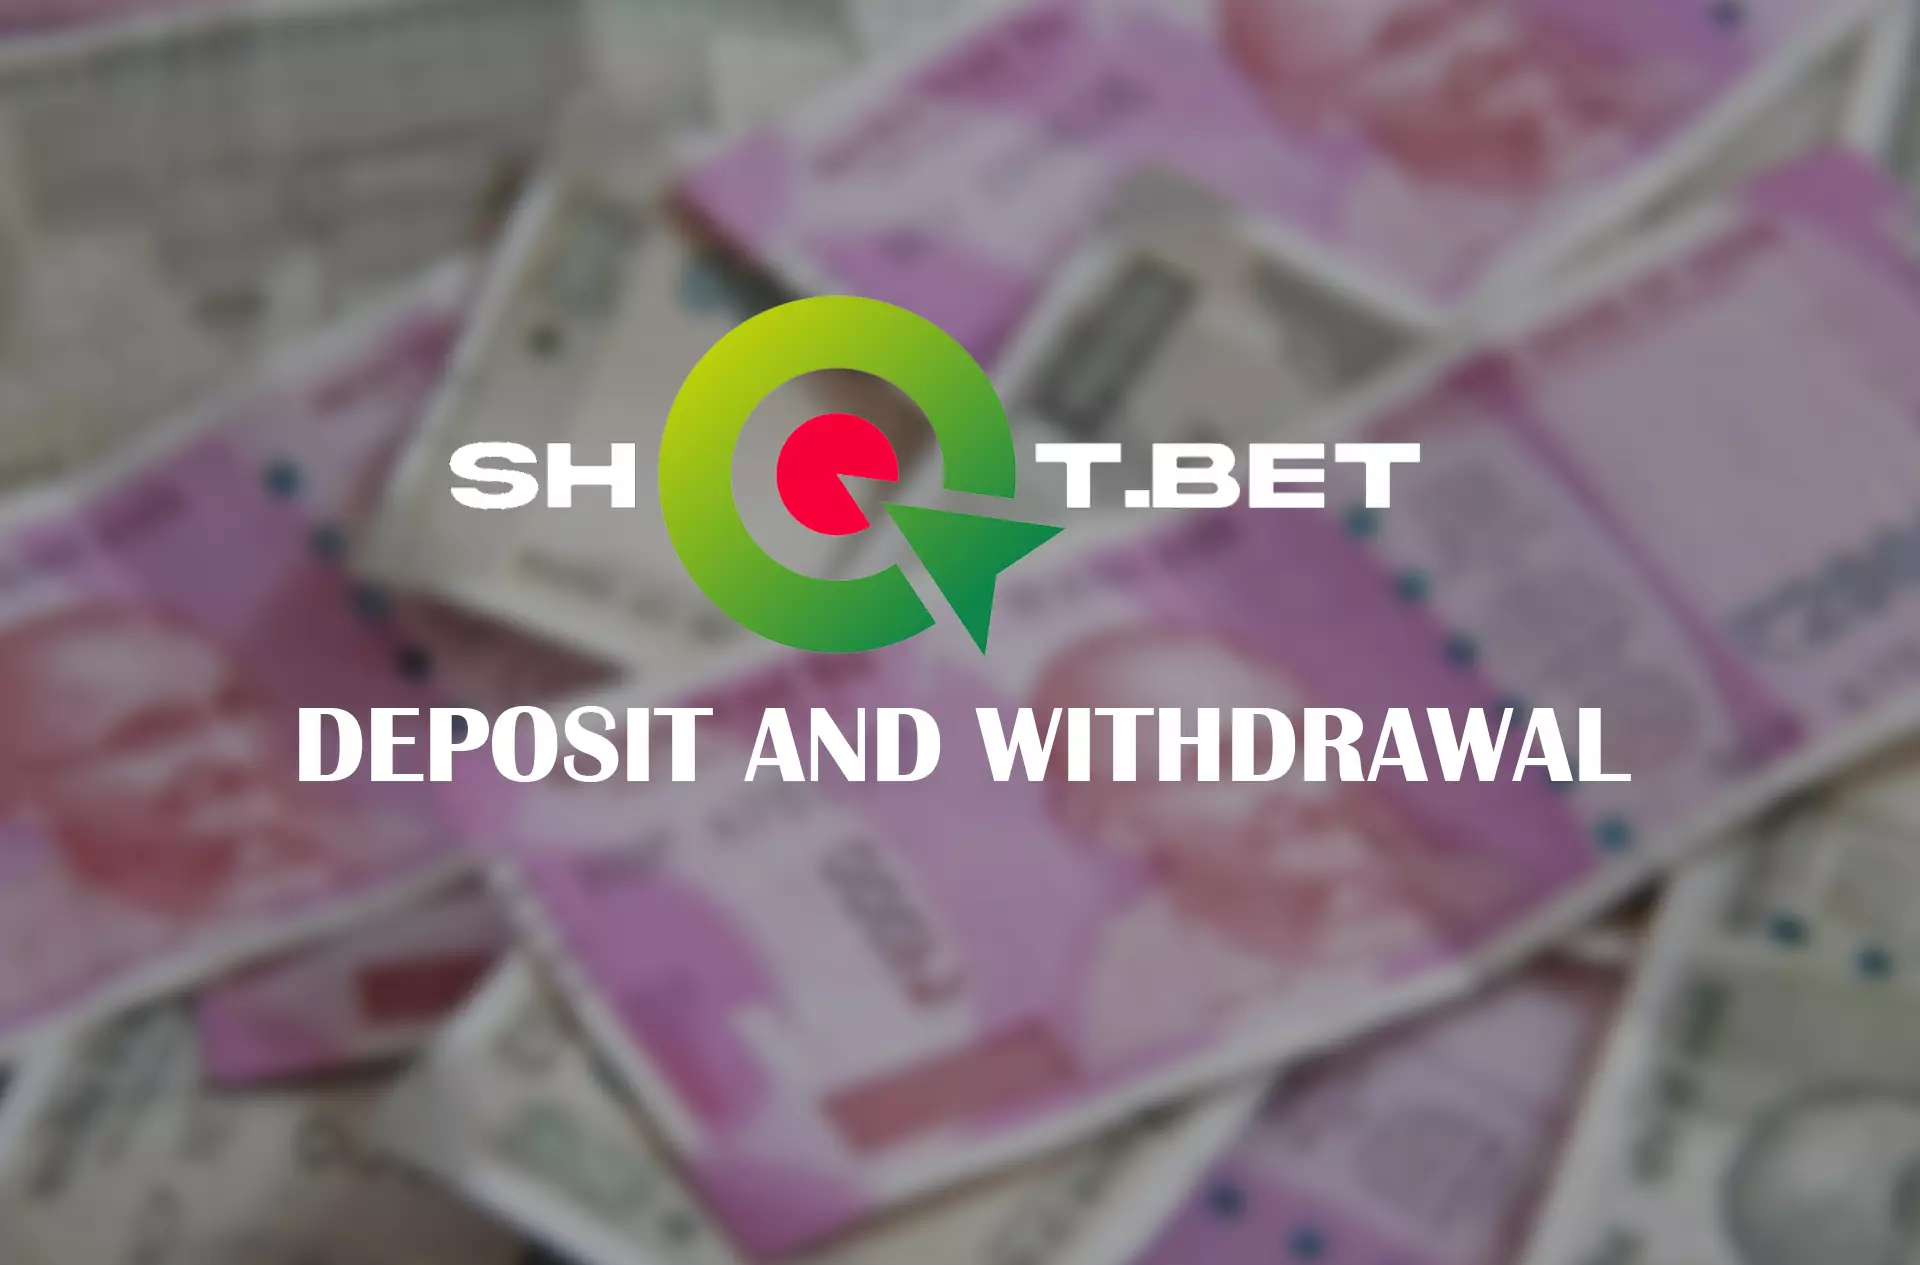 Deposit and withdraw funds from your betting account using e-wallets and bank cards.